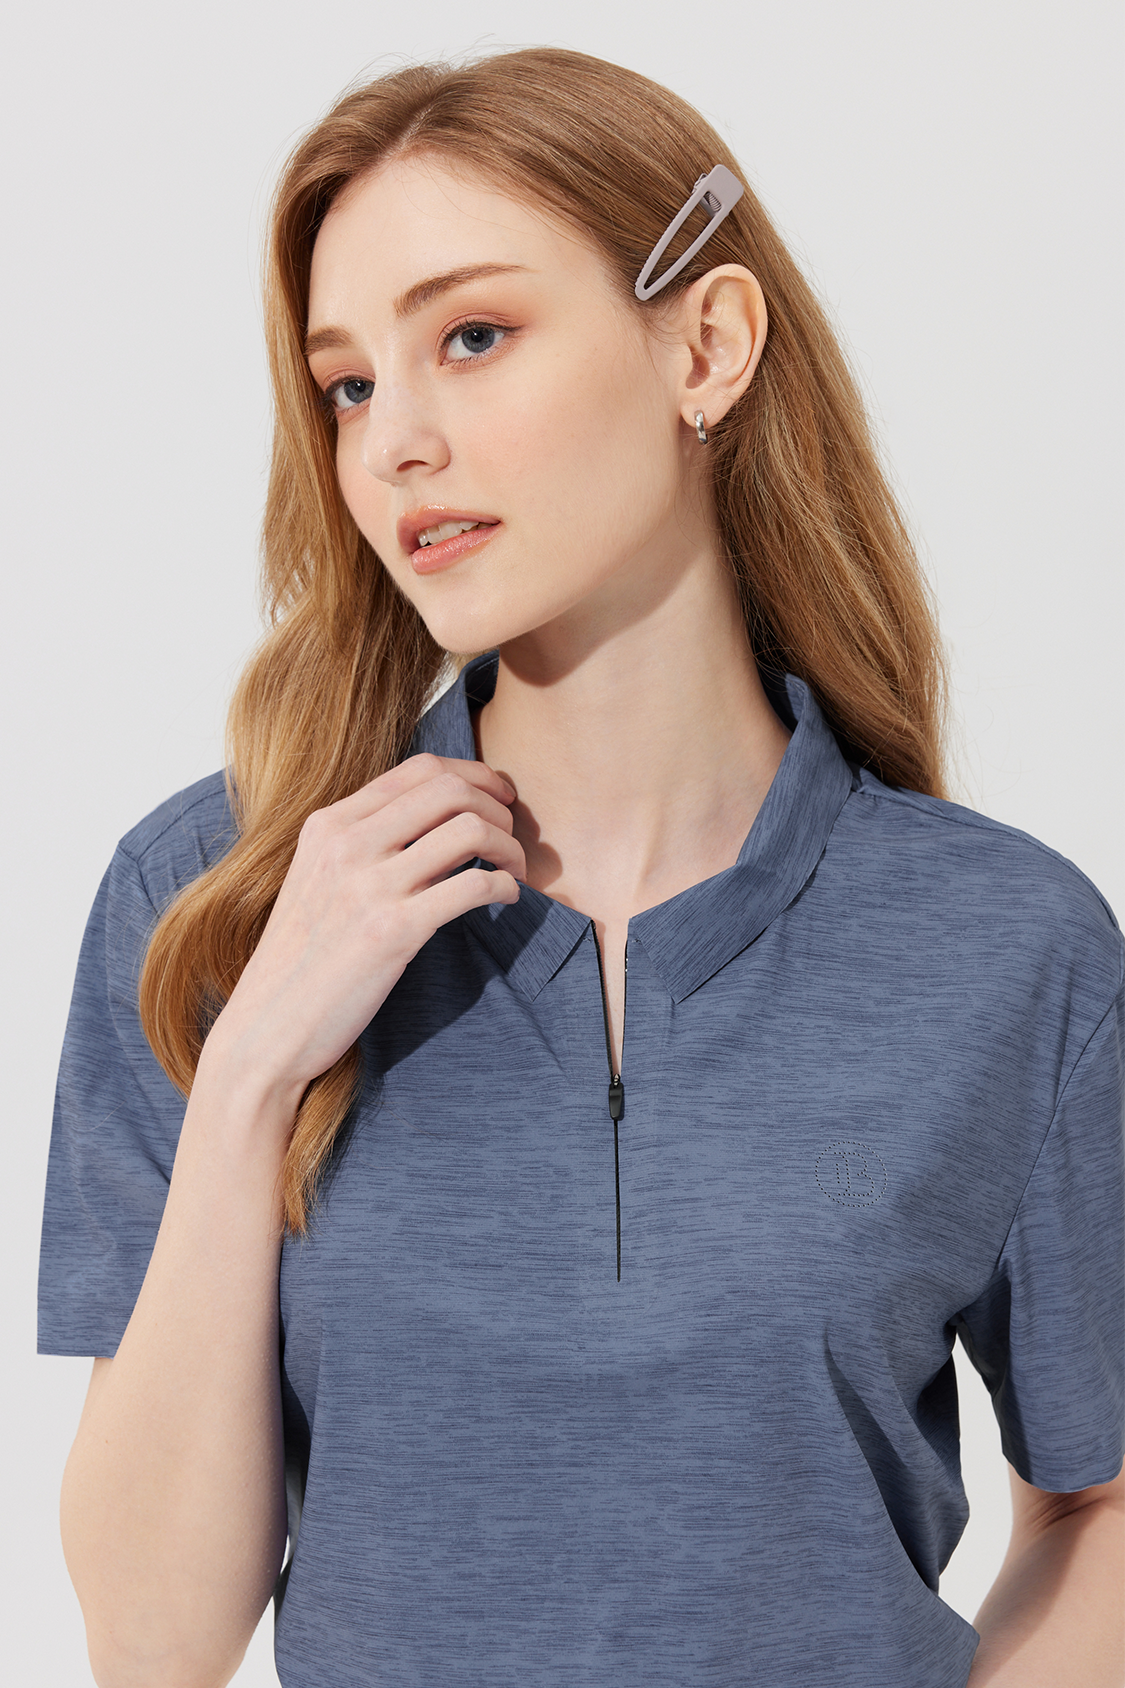 Ice-Tech Seamless Heat-Pressed Polo Shirt For Women